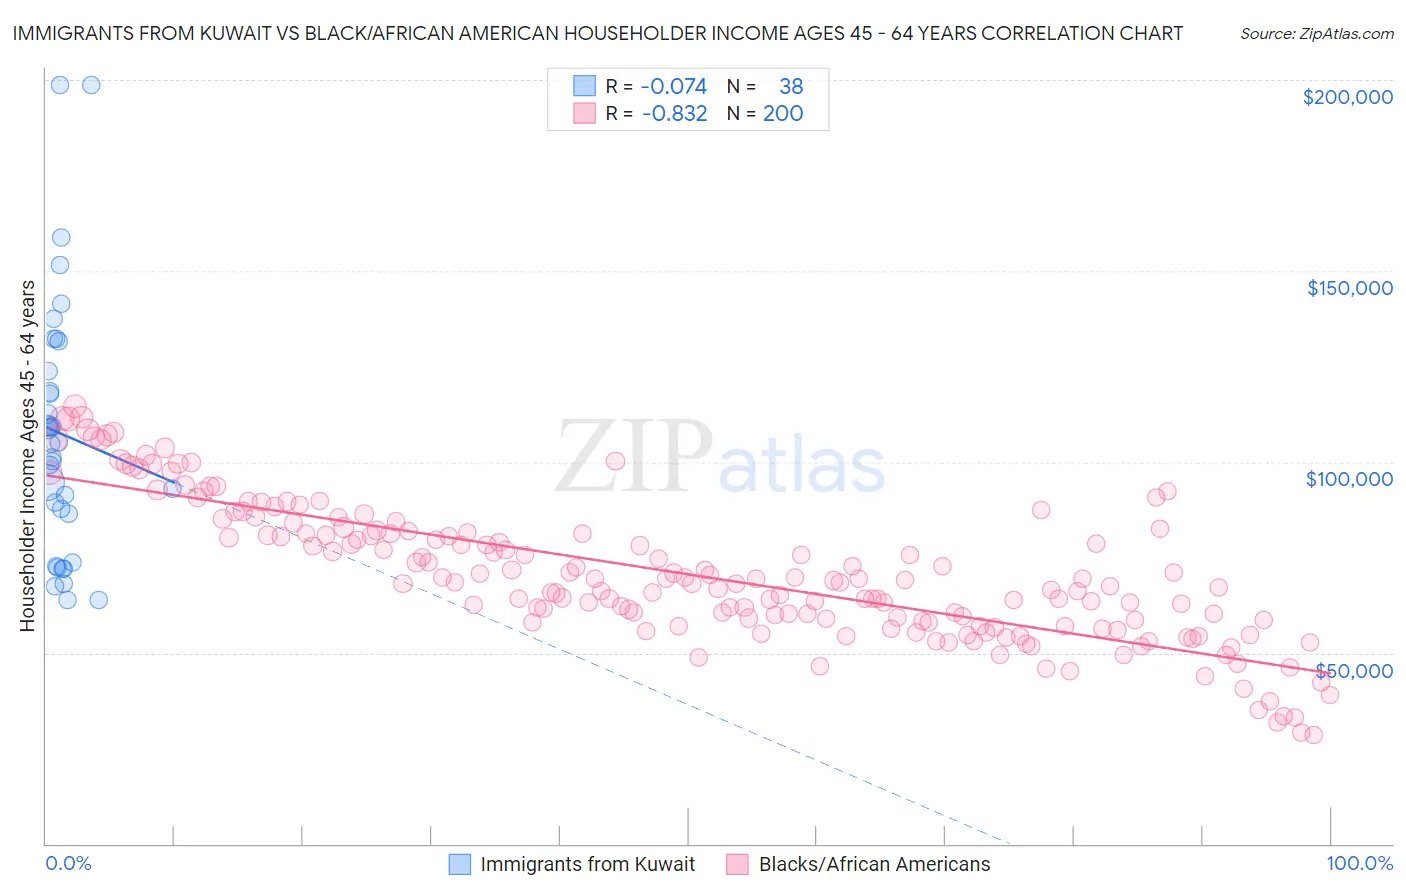 Immigrants from Kuwait vs Black/African American Householder Income Ages 45 - 64 years